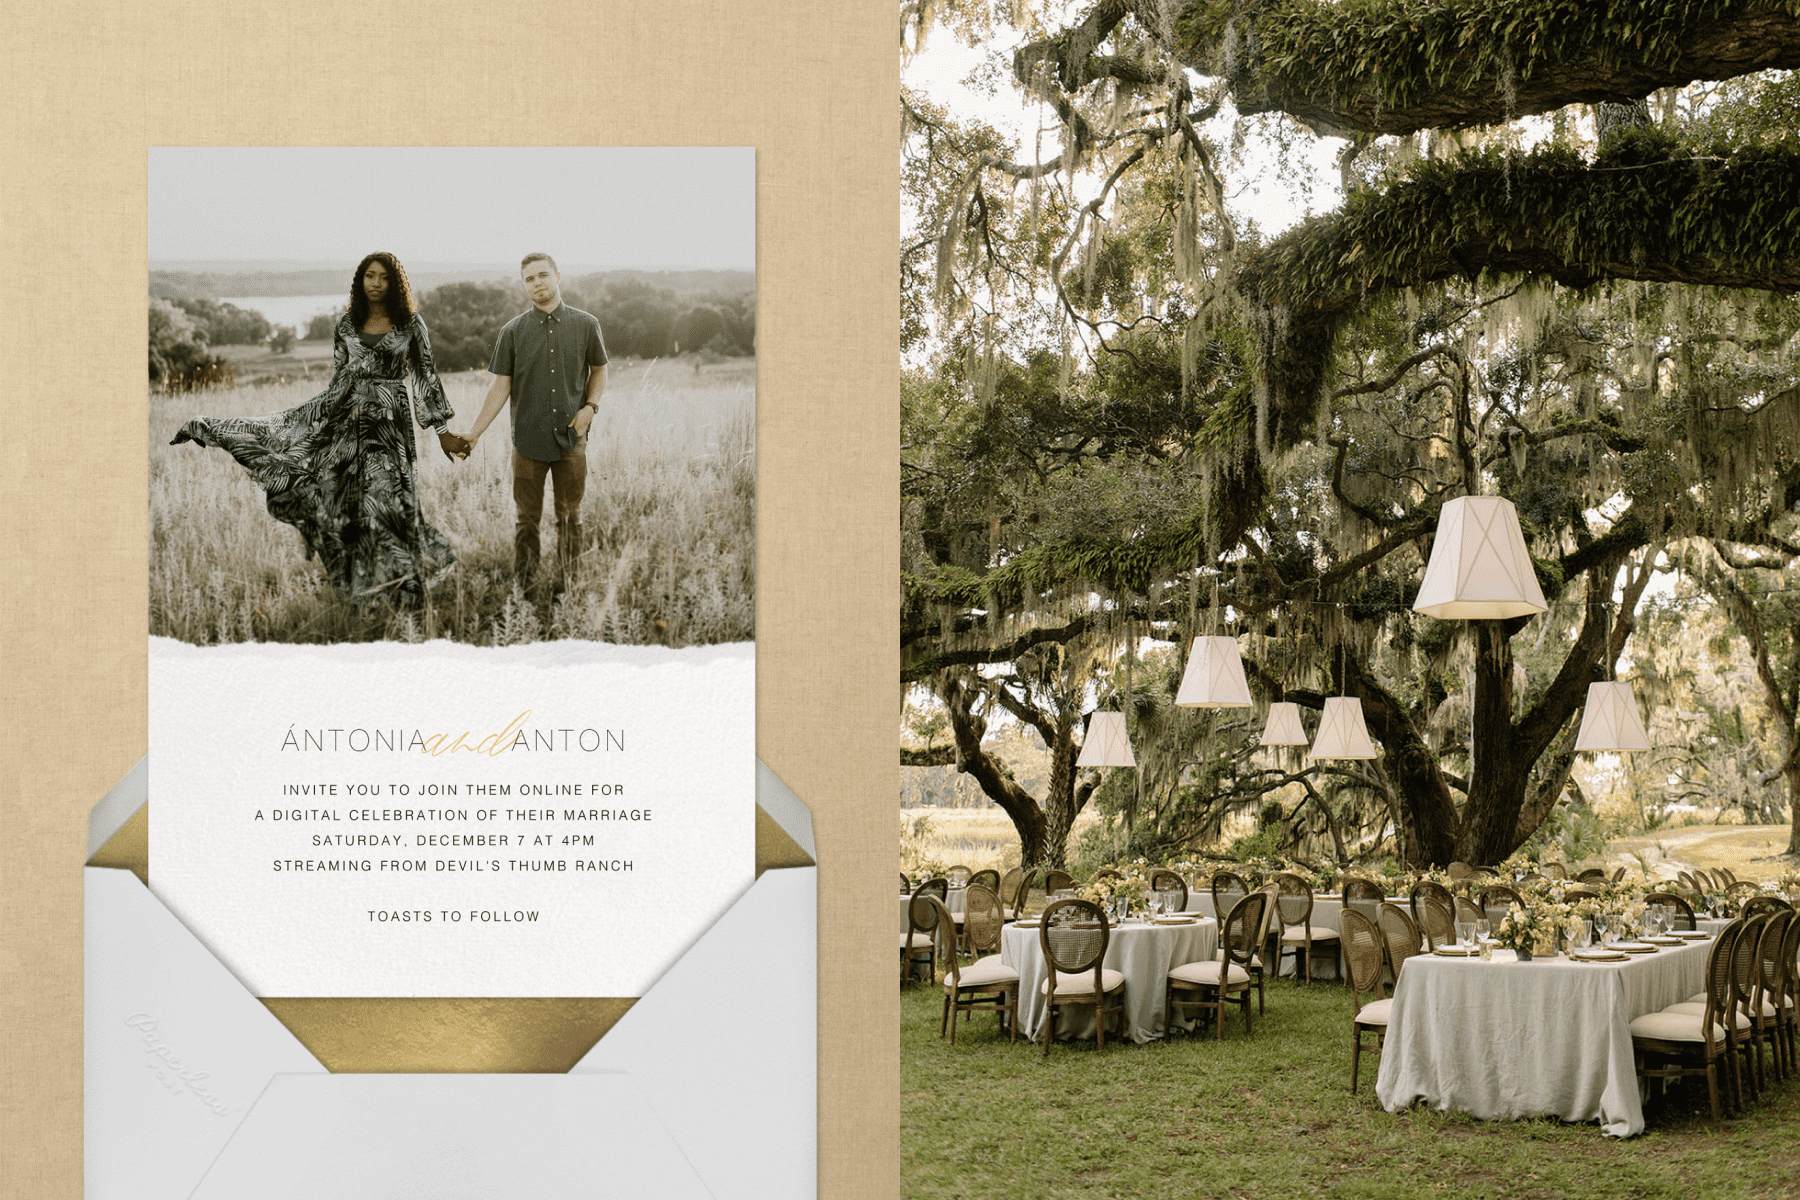 A wedding invitation with a photo of the couple on top and a torn edge detail. Right: Dinner tables set for an outdoor wedding beneath a large tree with Spanish moss.